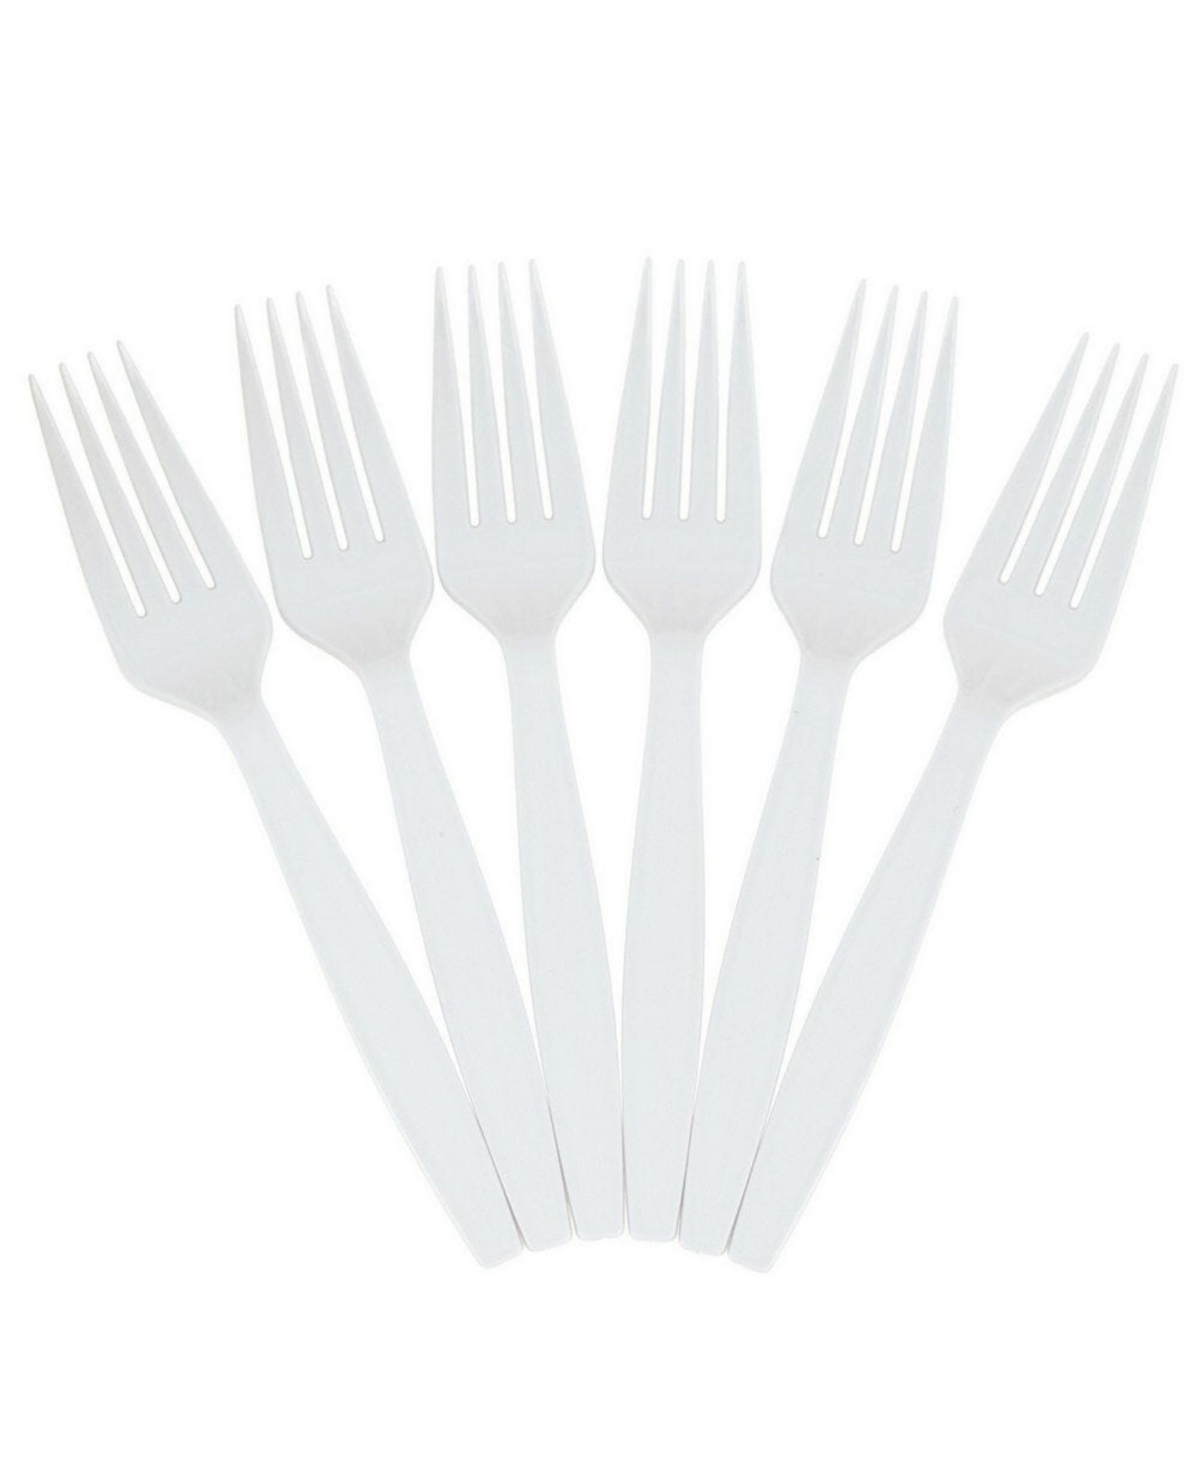 Big Party Pack of Premium Plastic Forks - 100 Disposable Forks Per Box - White